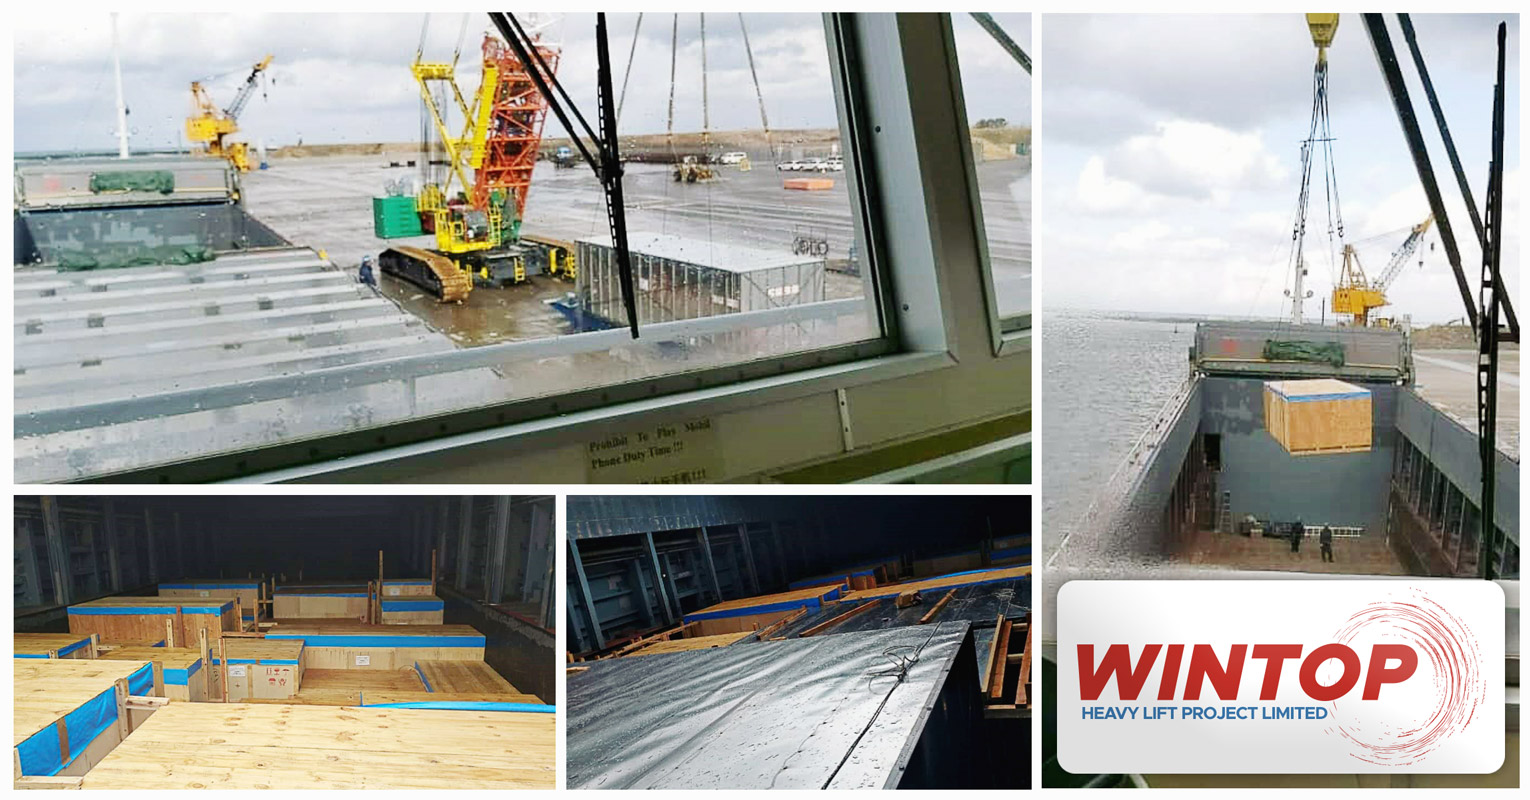 Wintop Heavy Lift Chartered a Vessel for a 1236cbm 318mt Project Shipment of Machinery